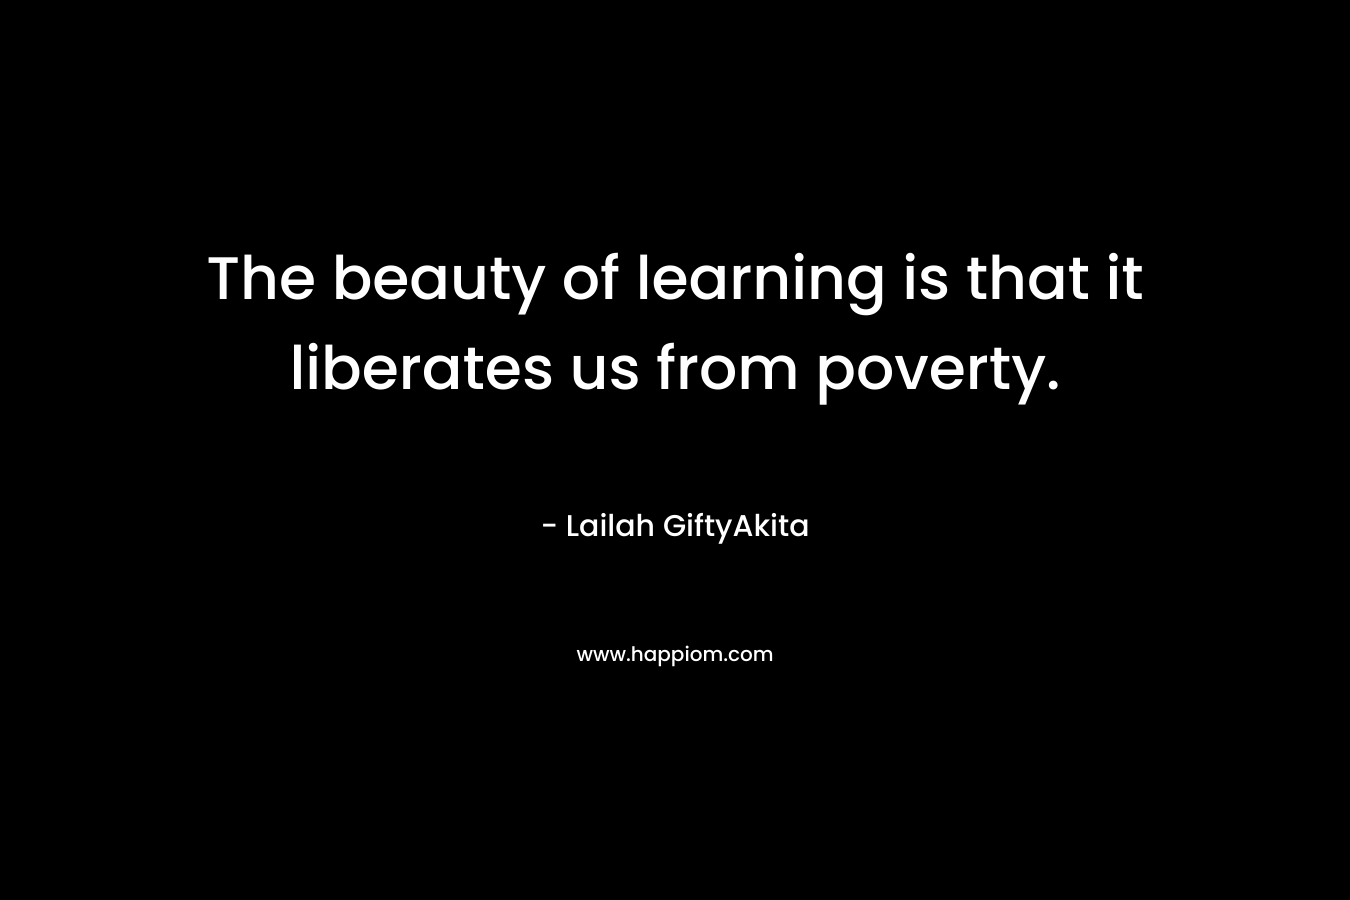 The beauty of learning is that it liberates us from poverty. – Lailah GiftyAkita